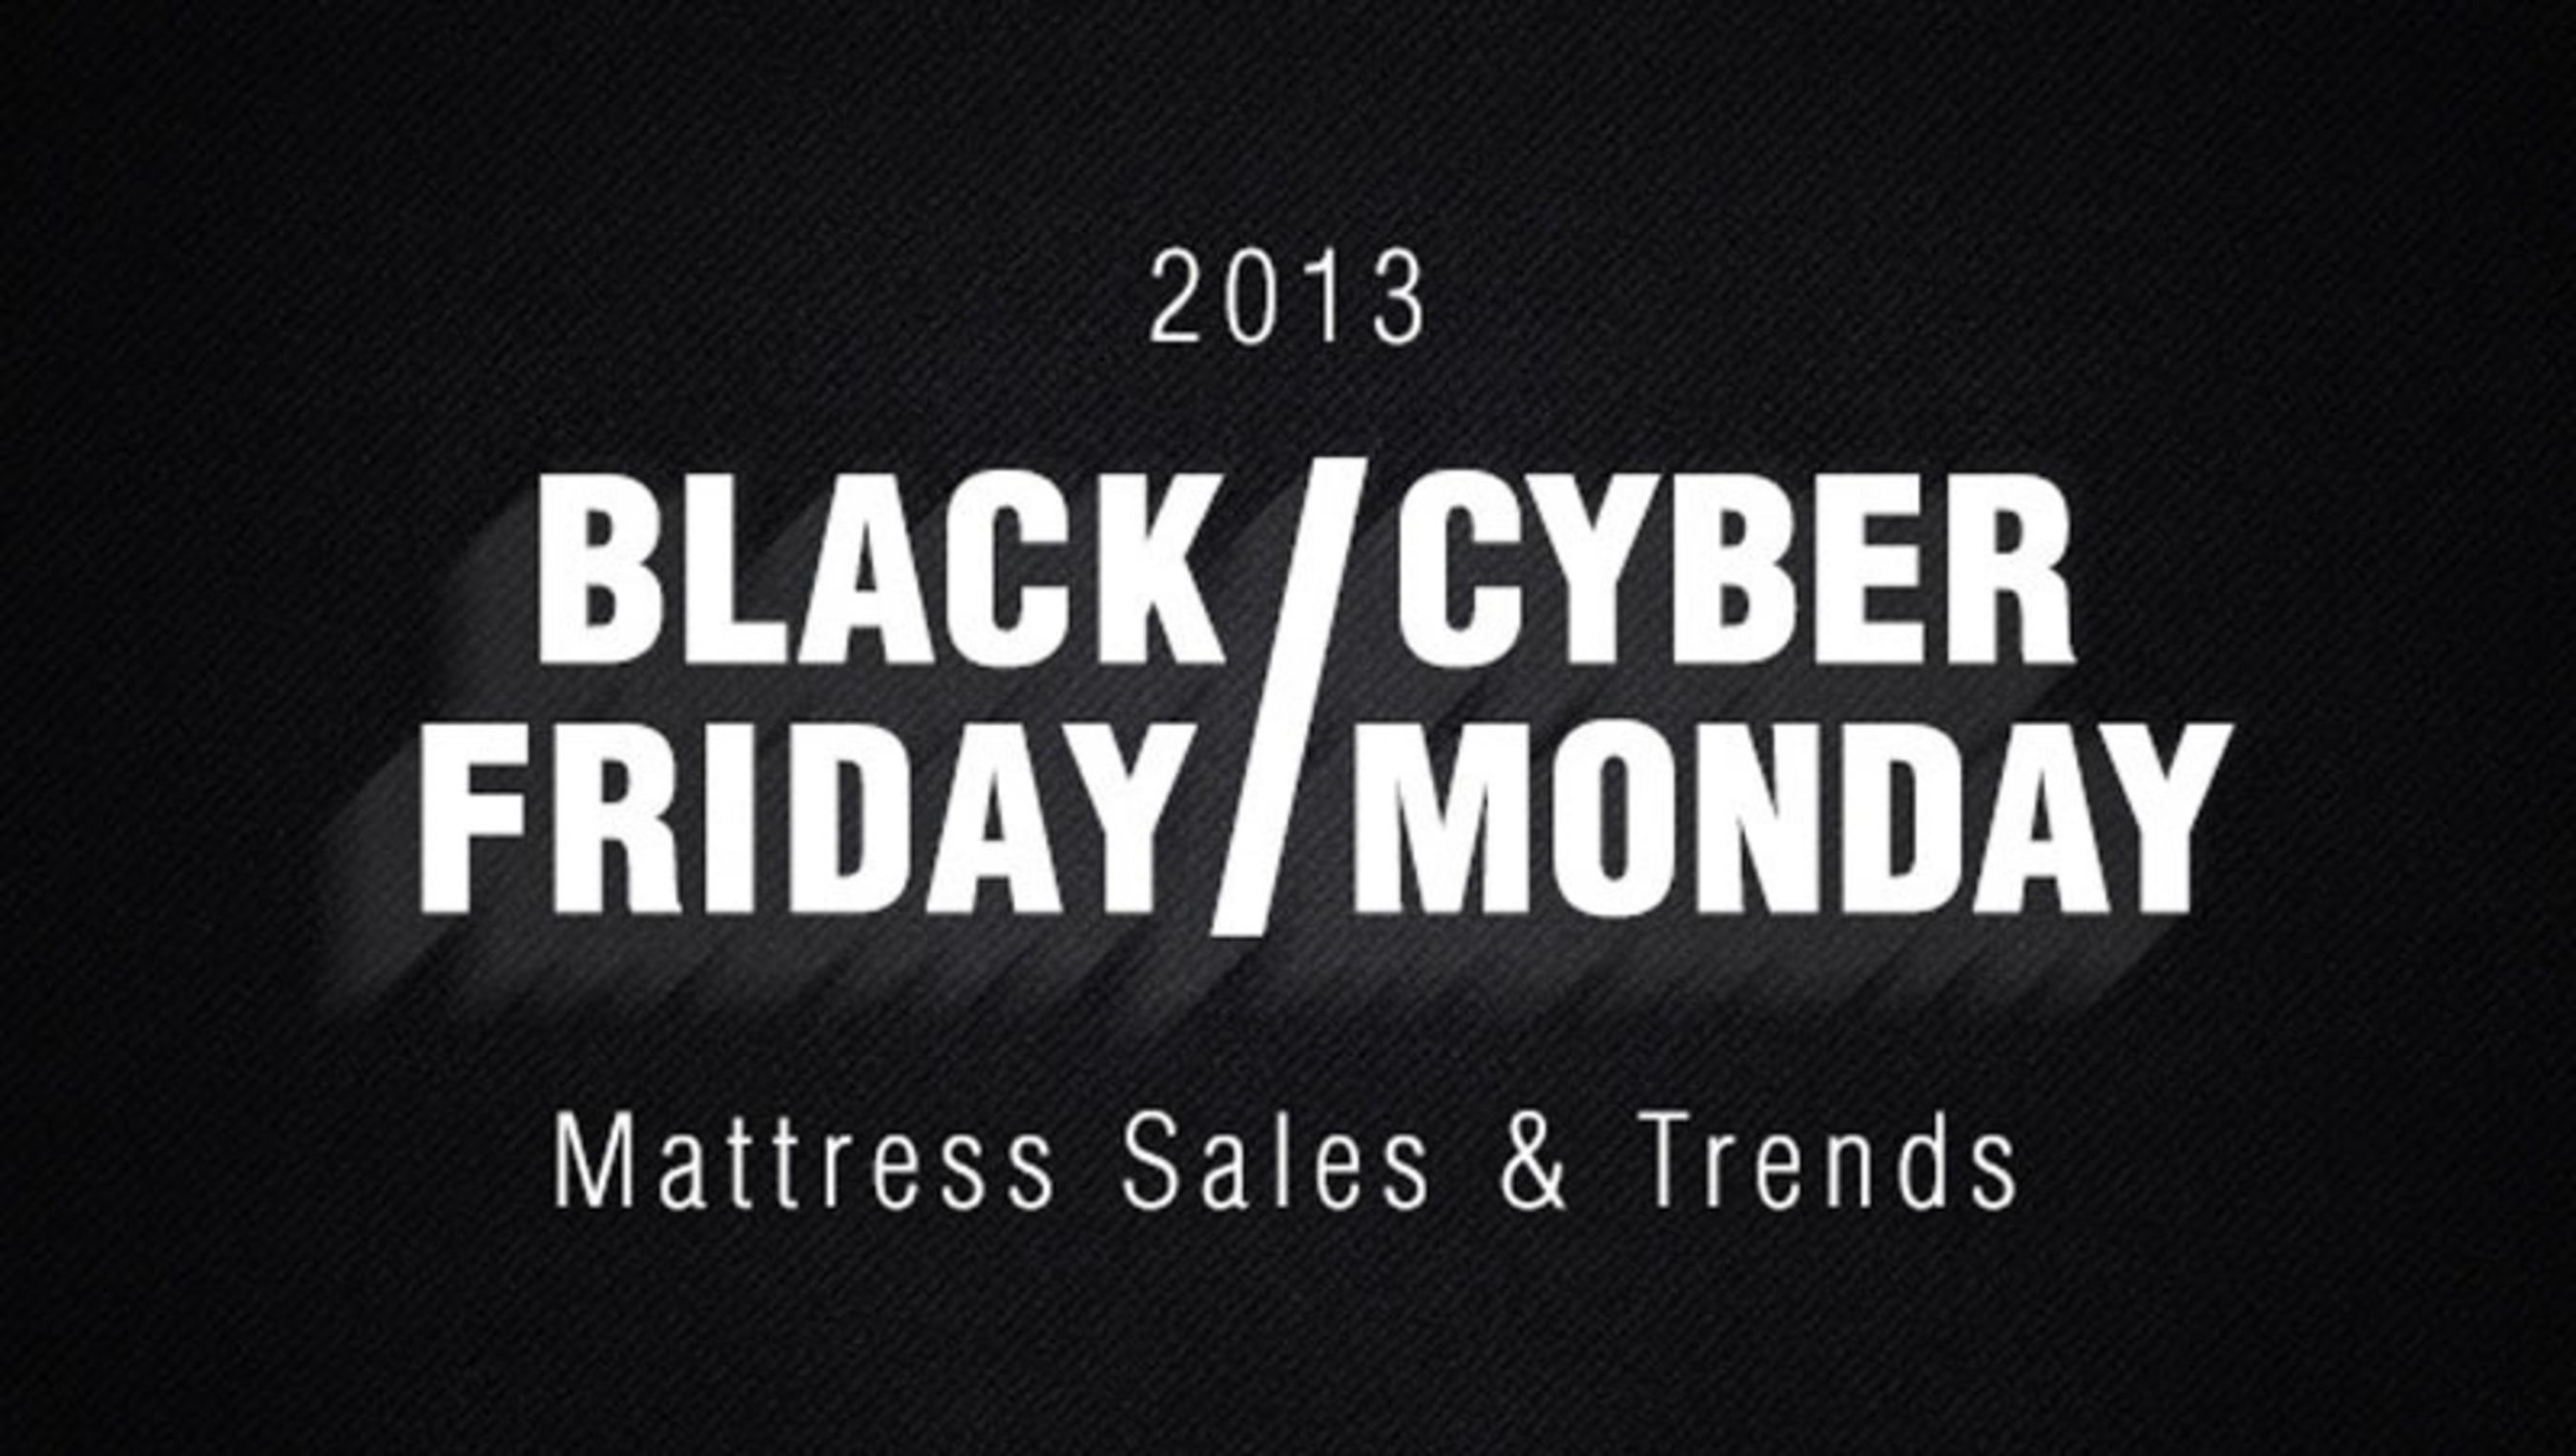 2013 Black Friday & Cyber Monday Mattress Trends Discussed in Latest Article from The Best Mattress. (PRNewsFoto/TheBest-Mattress.org) (PRNewsFoto/THEBEST-MATTRESS.ORG)